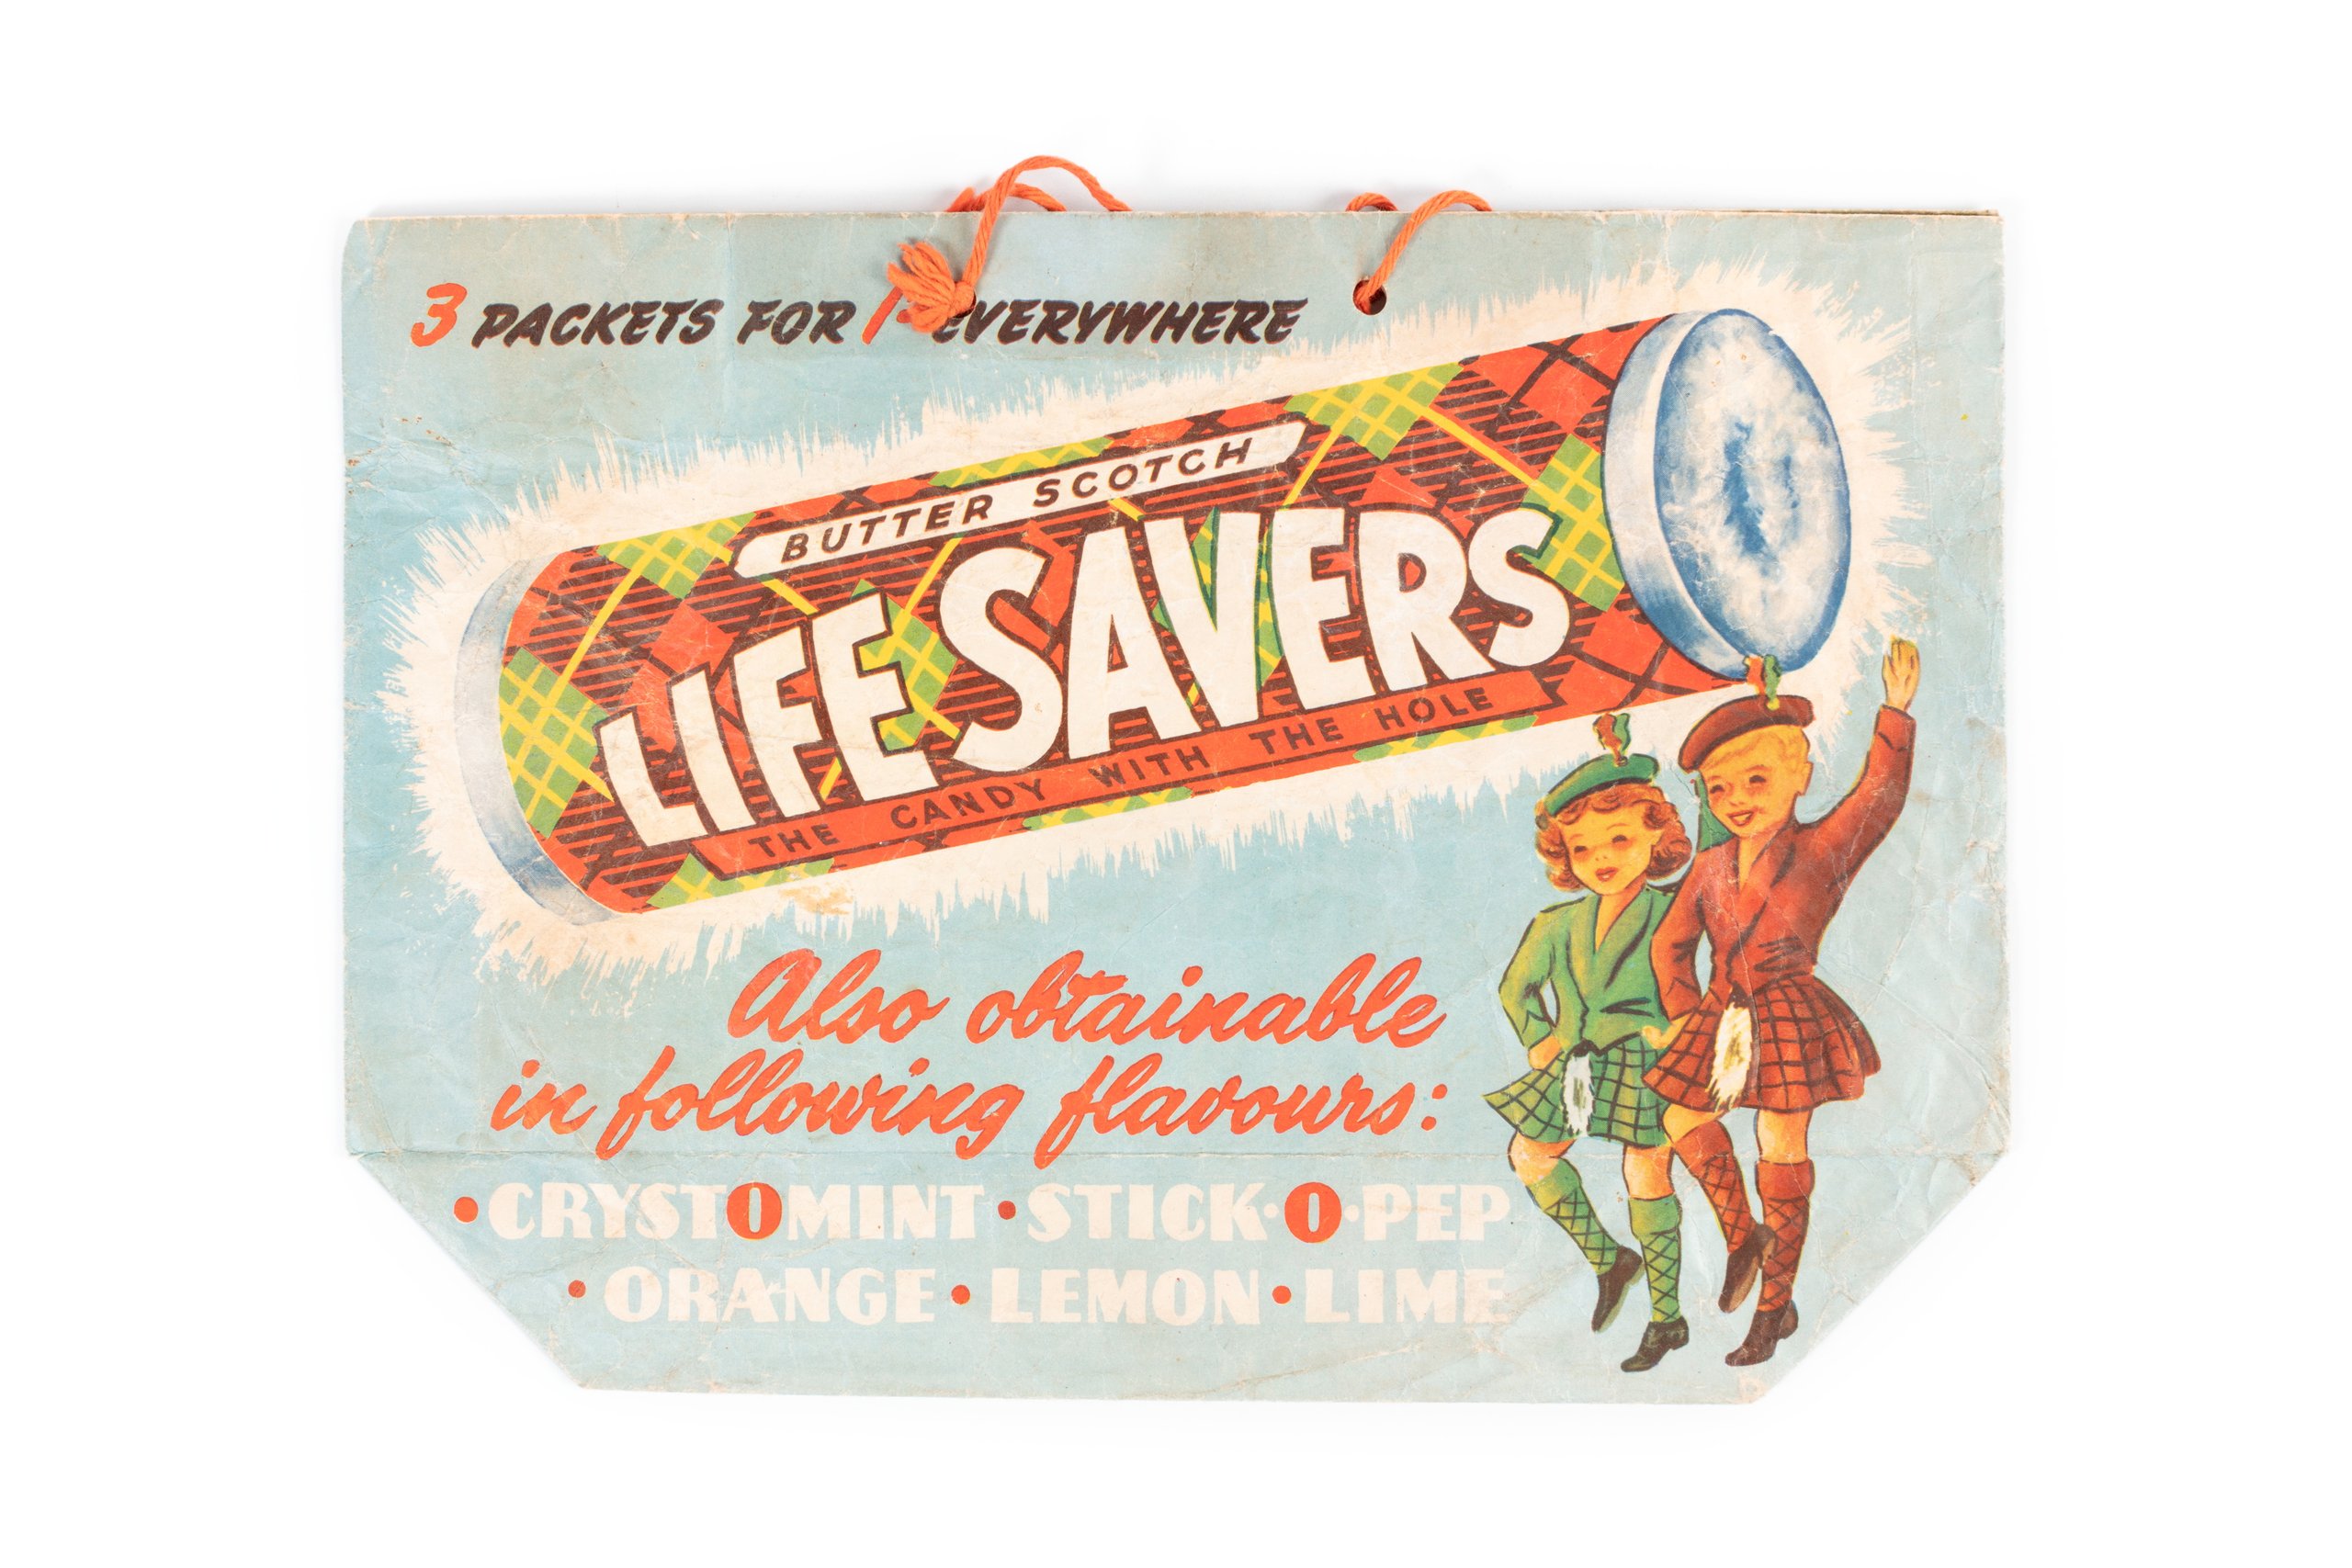 'Lifesavers' showbag from the Sydney Royal Easter Show